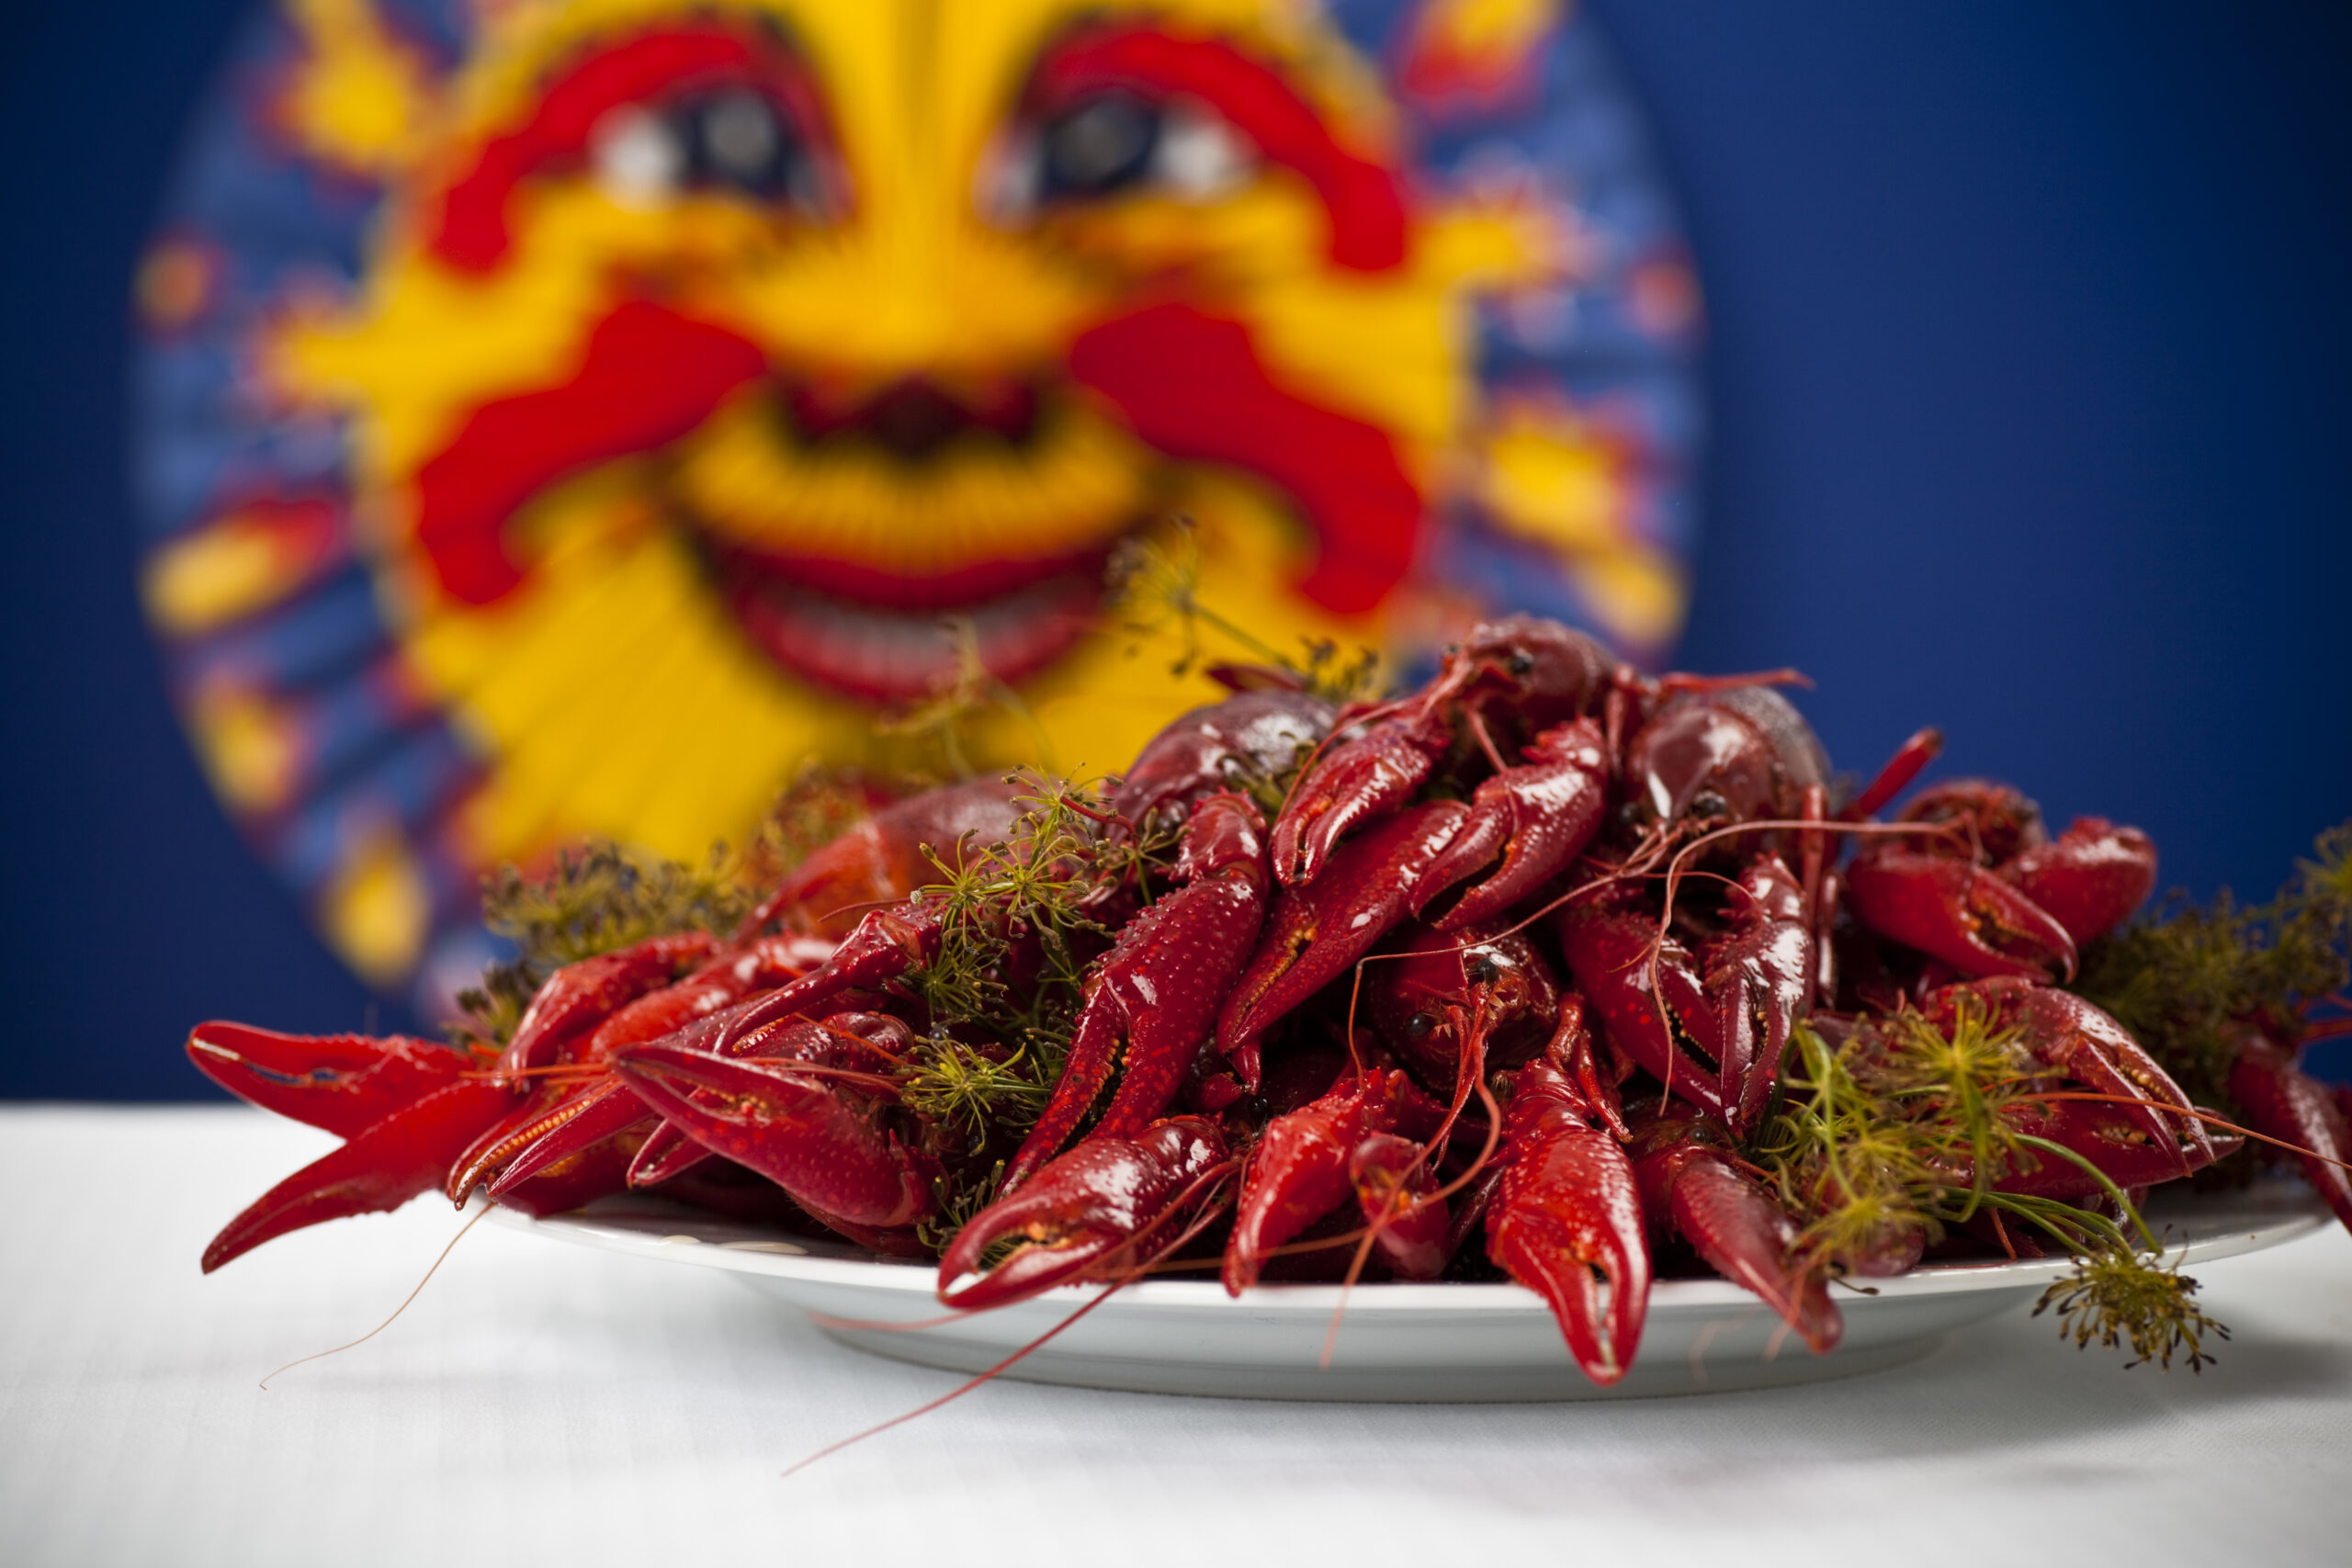 Many colorful crayfish on a plate with dill, blue background